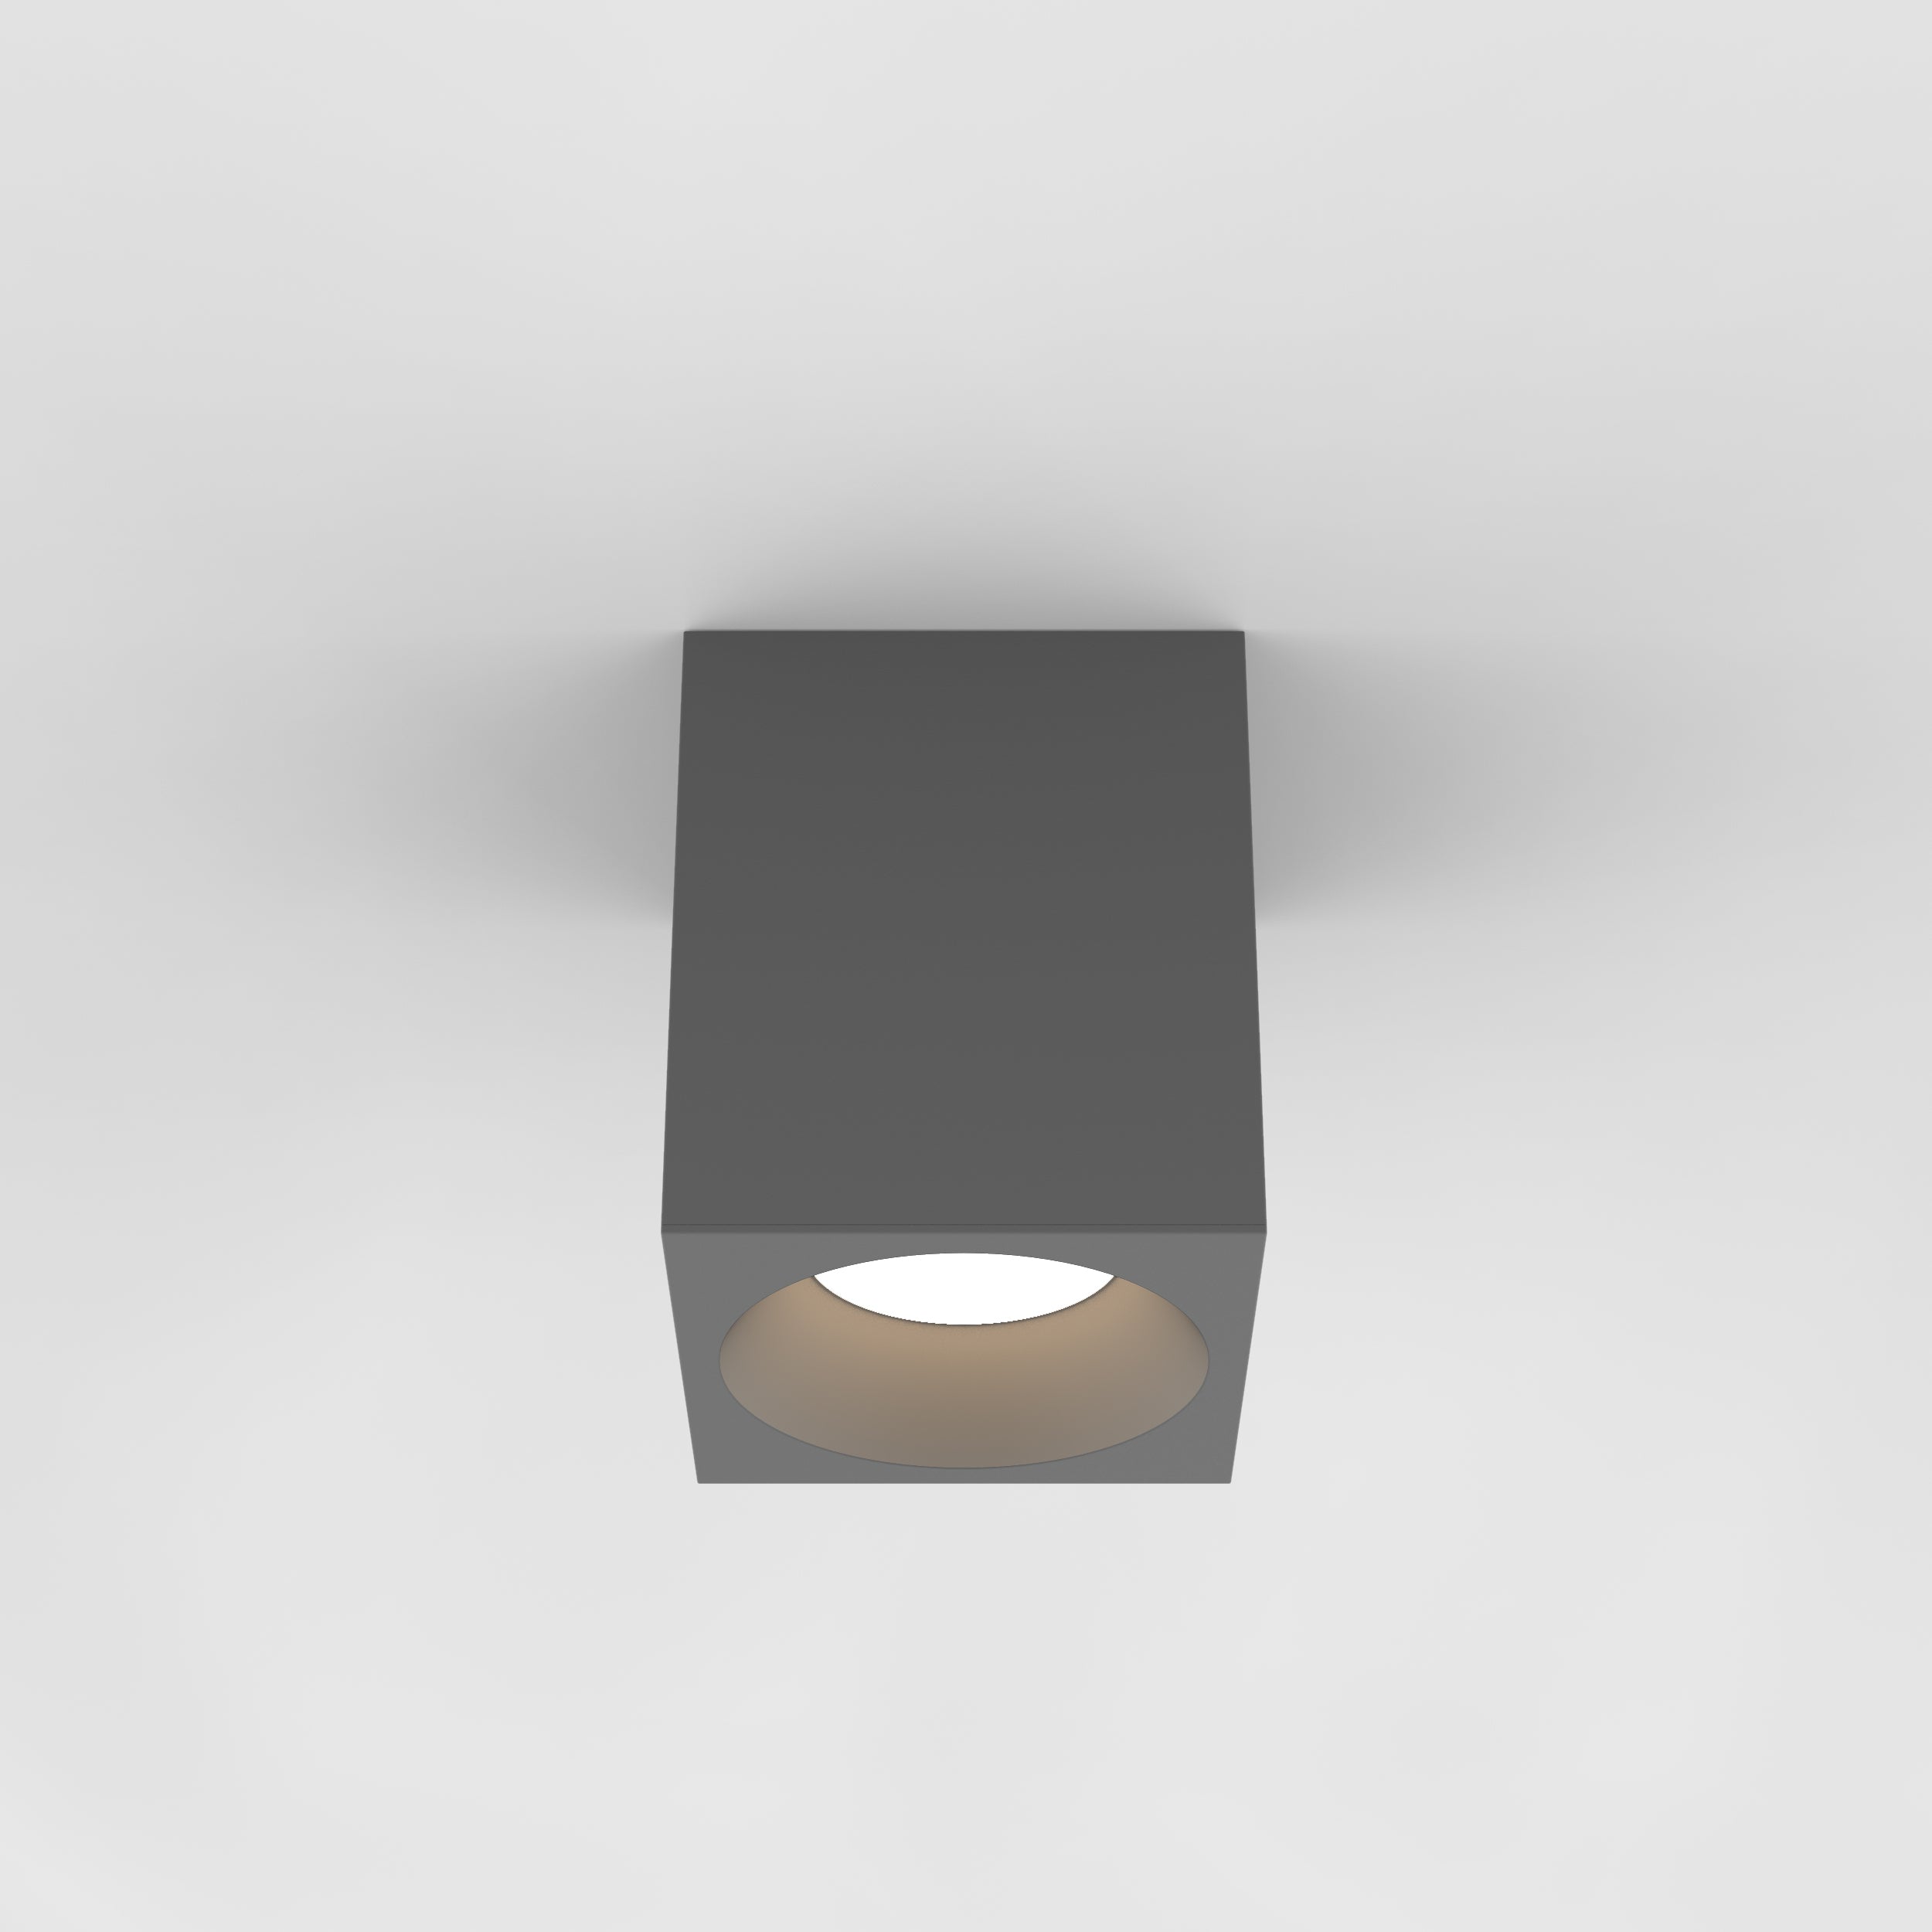 Astro Lighting Kos Square Recessed Astro Lighting 4.53x4.53x5.59 Textured Grey Yes (Integral), AC LED Module